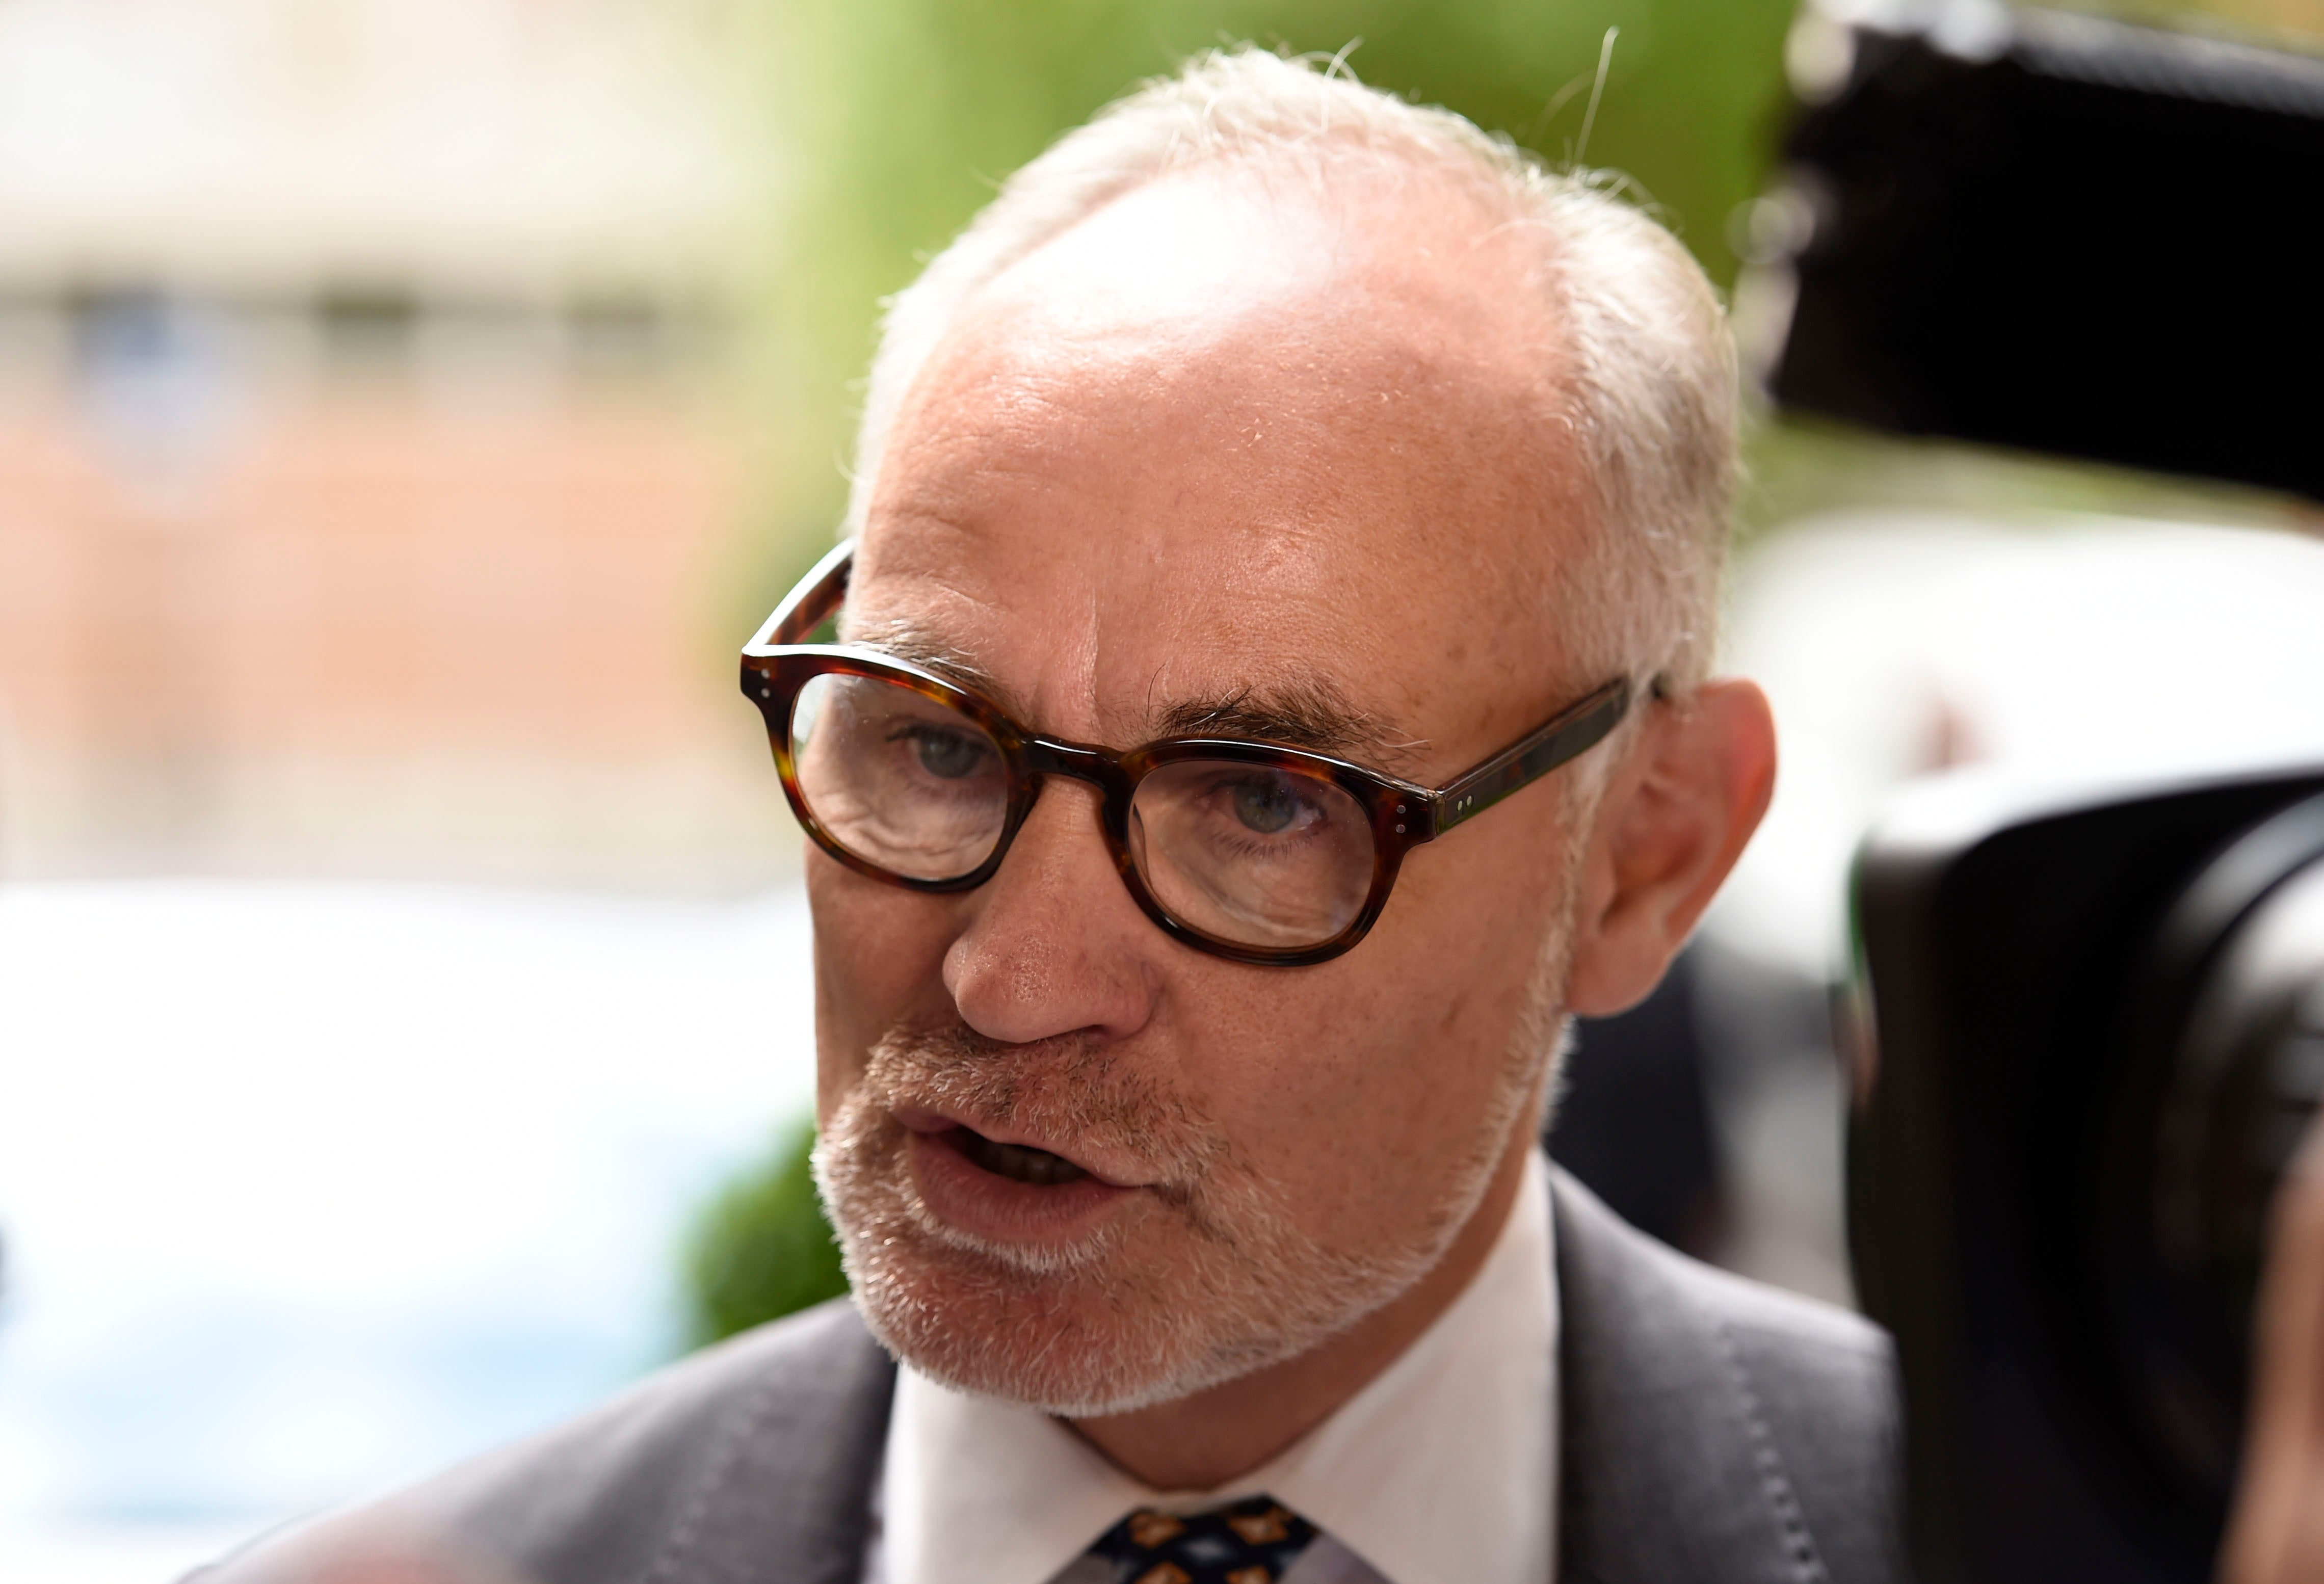 Crispin Blunt has announced he will stand down at the next election